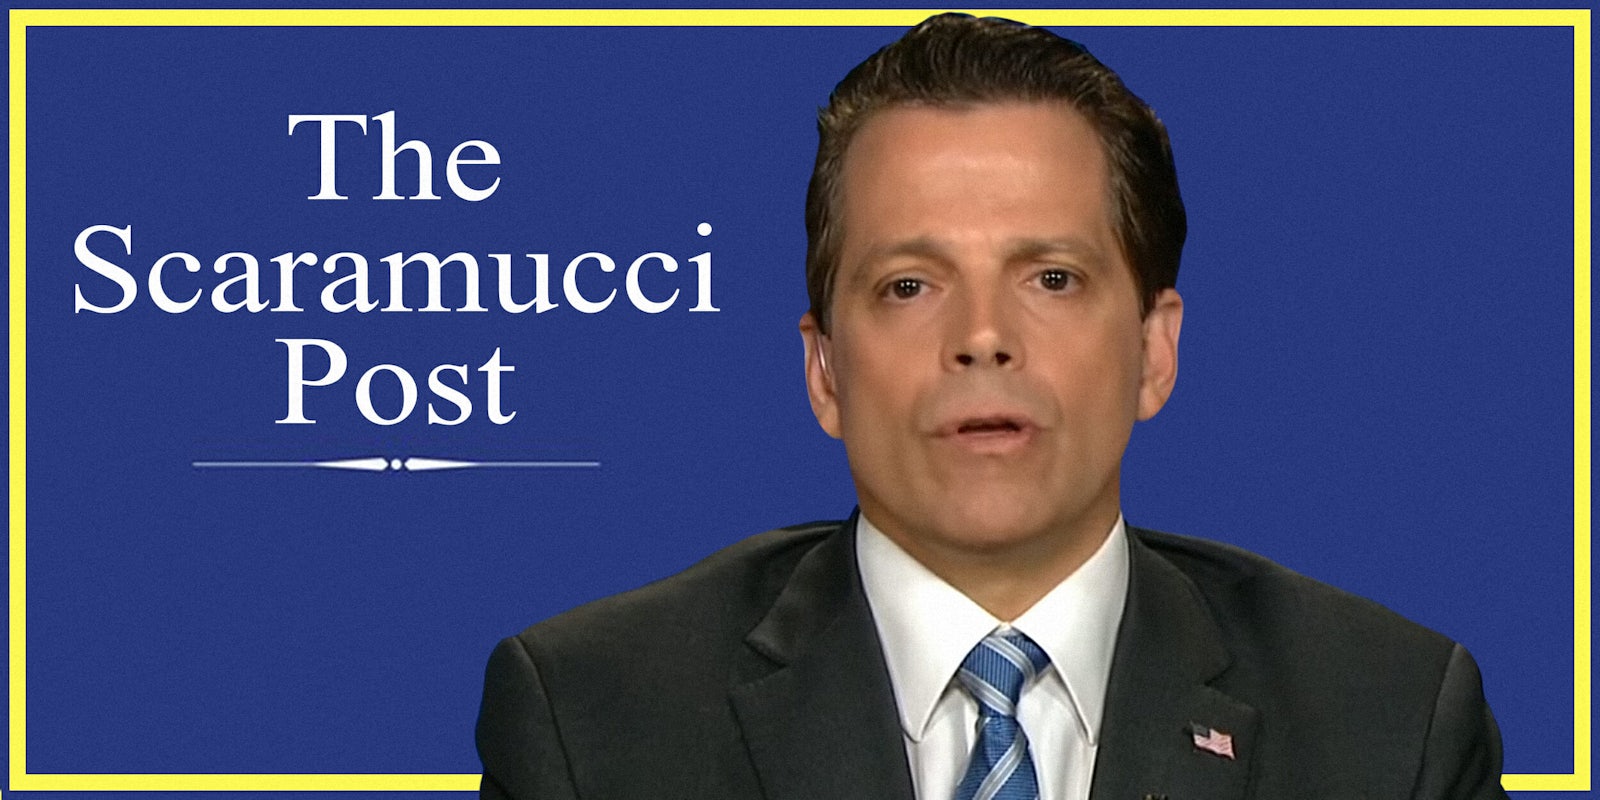 Anthony Scaramucci and the Scaramucci Post